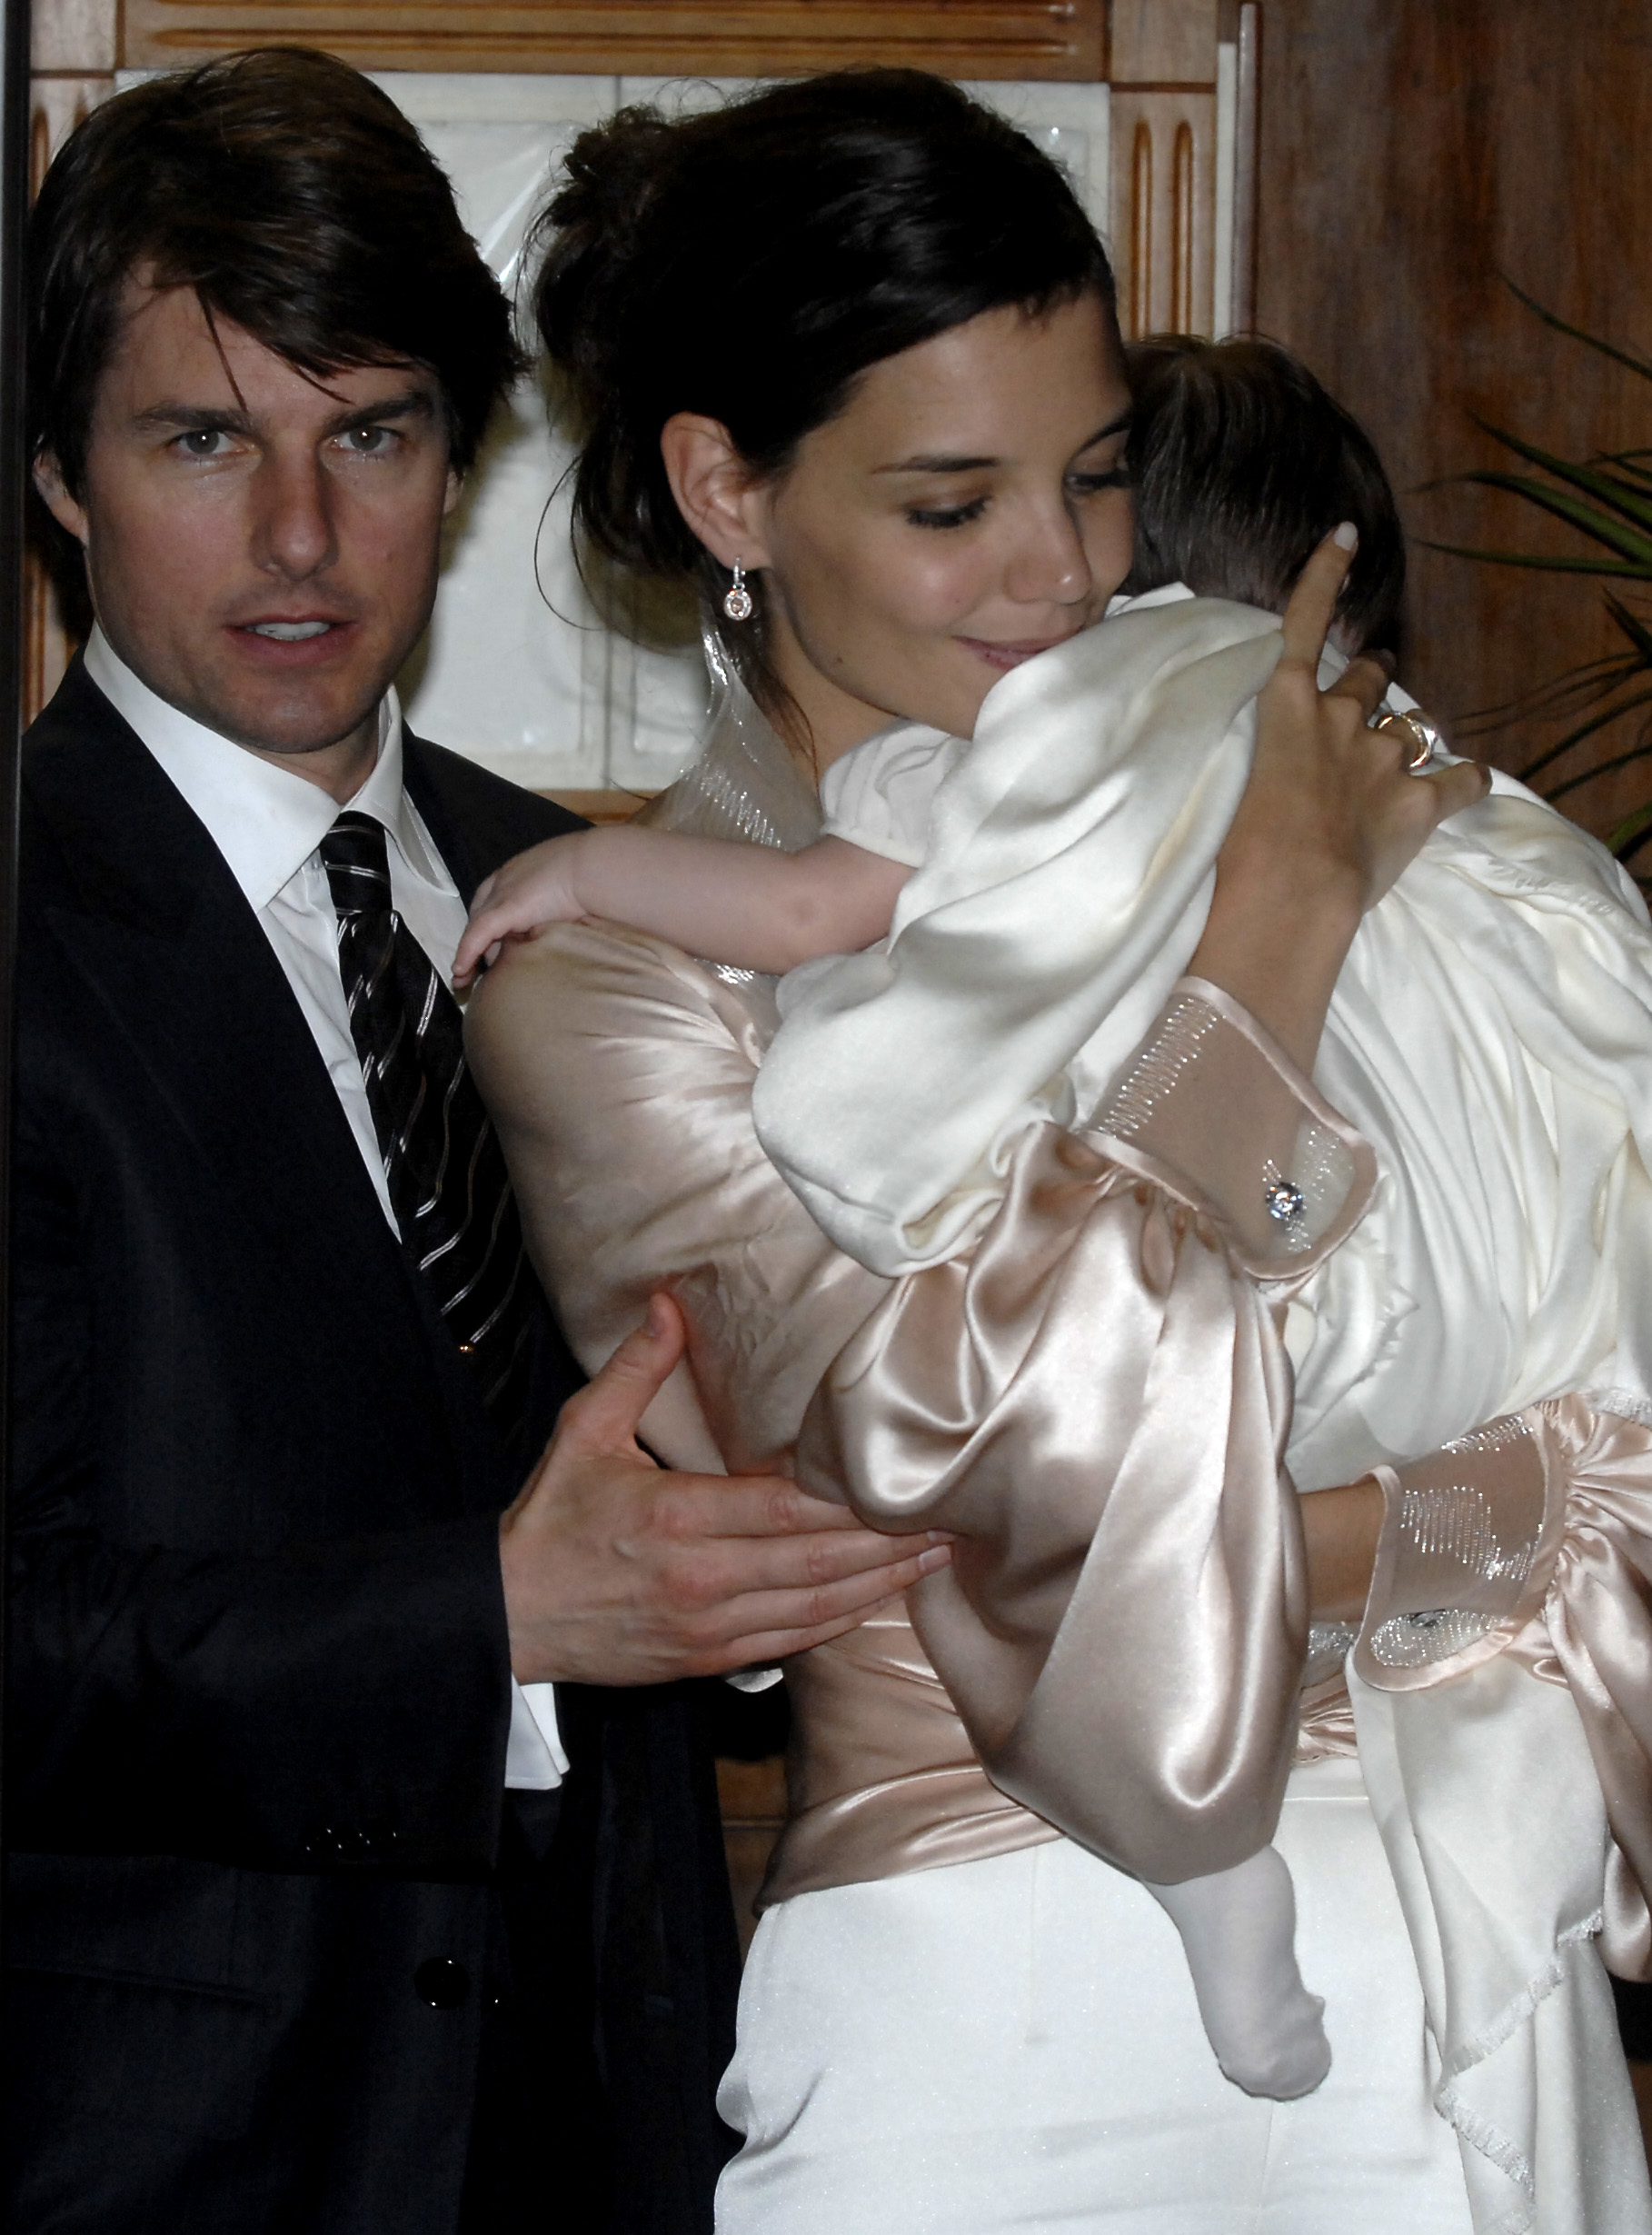 Tom Cruise, Katie Holmes and Suri Cruise at Rome's "Nino's" restaurant on November 16, 2006 in Rome Italy. | Source: Getty Images